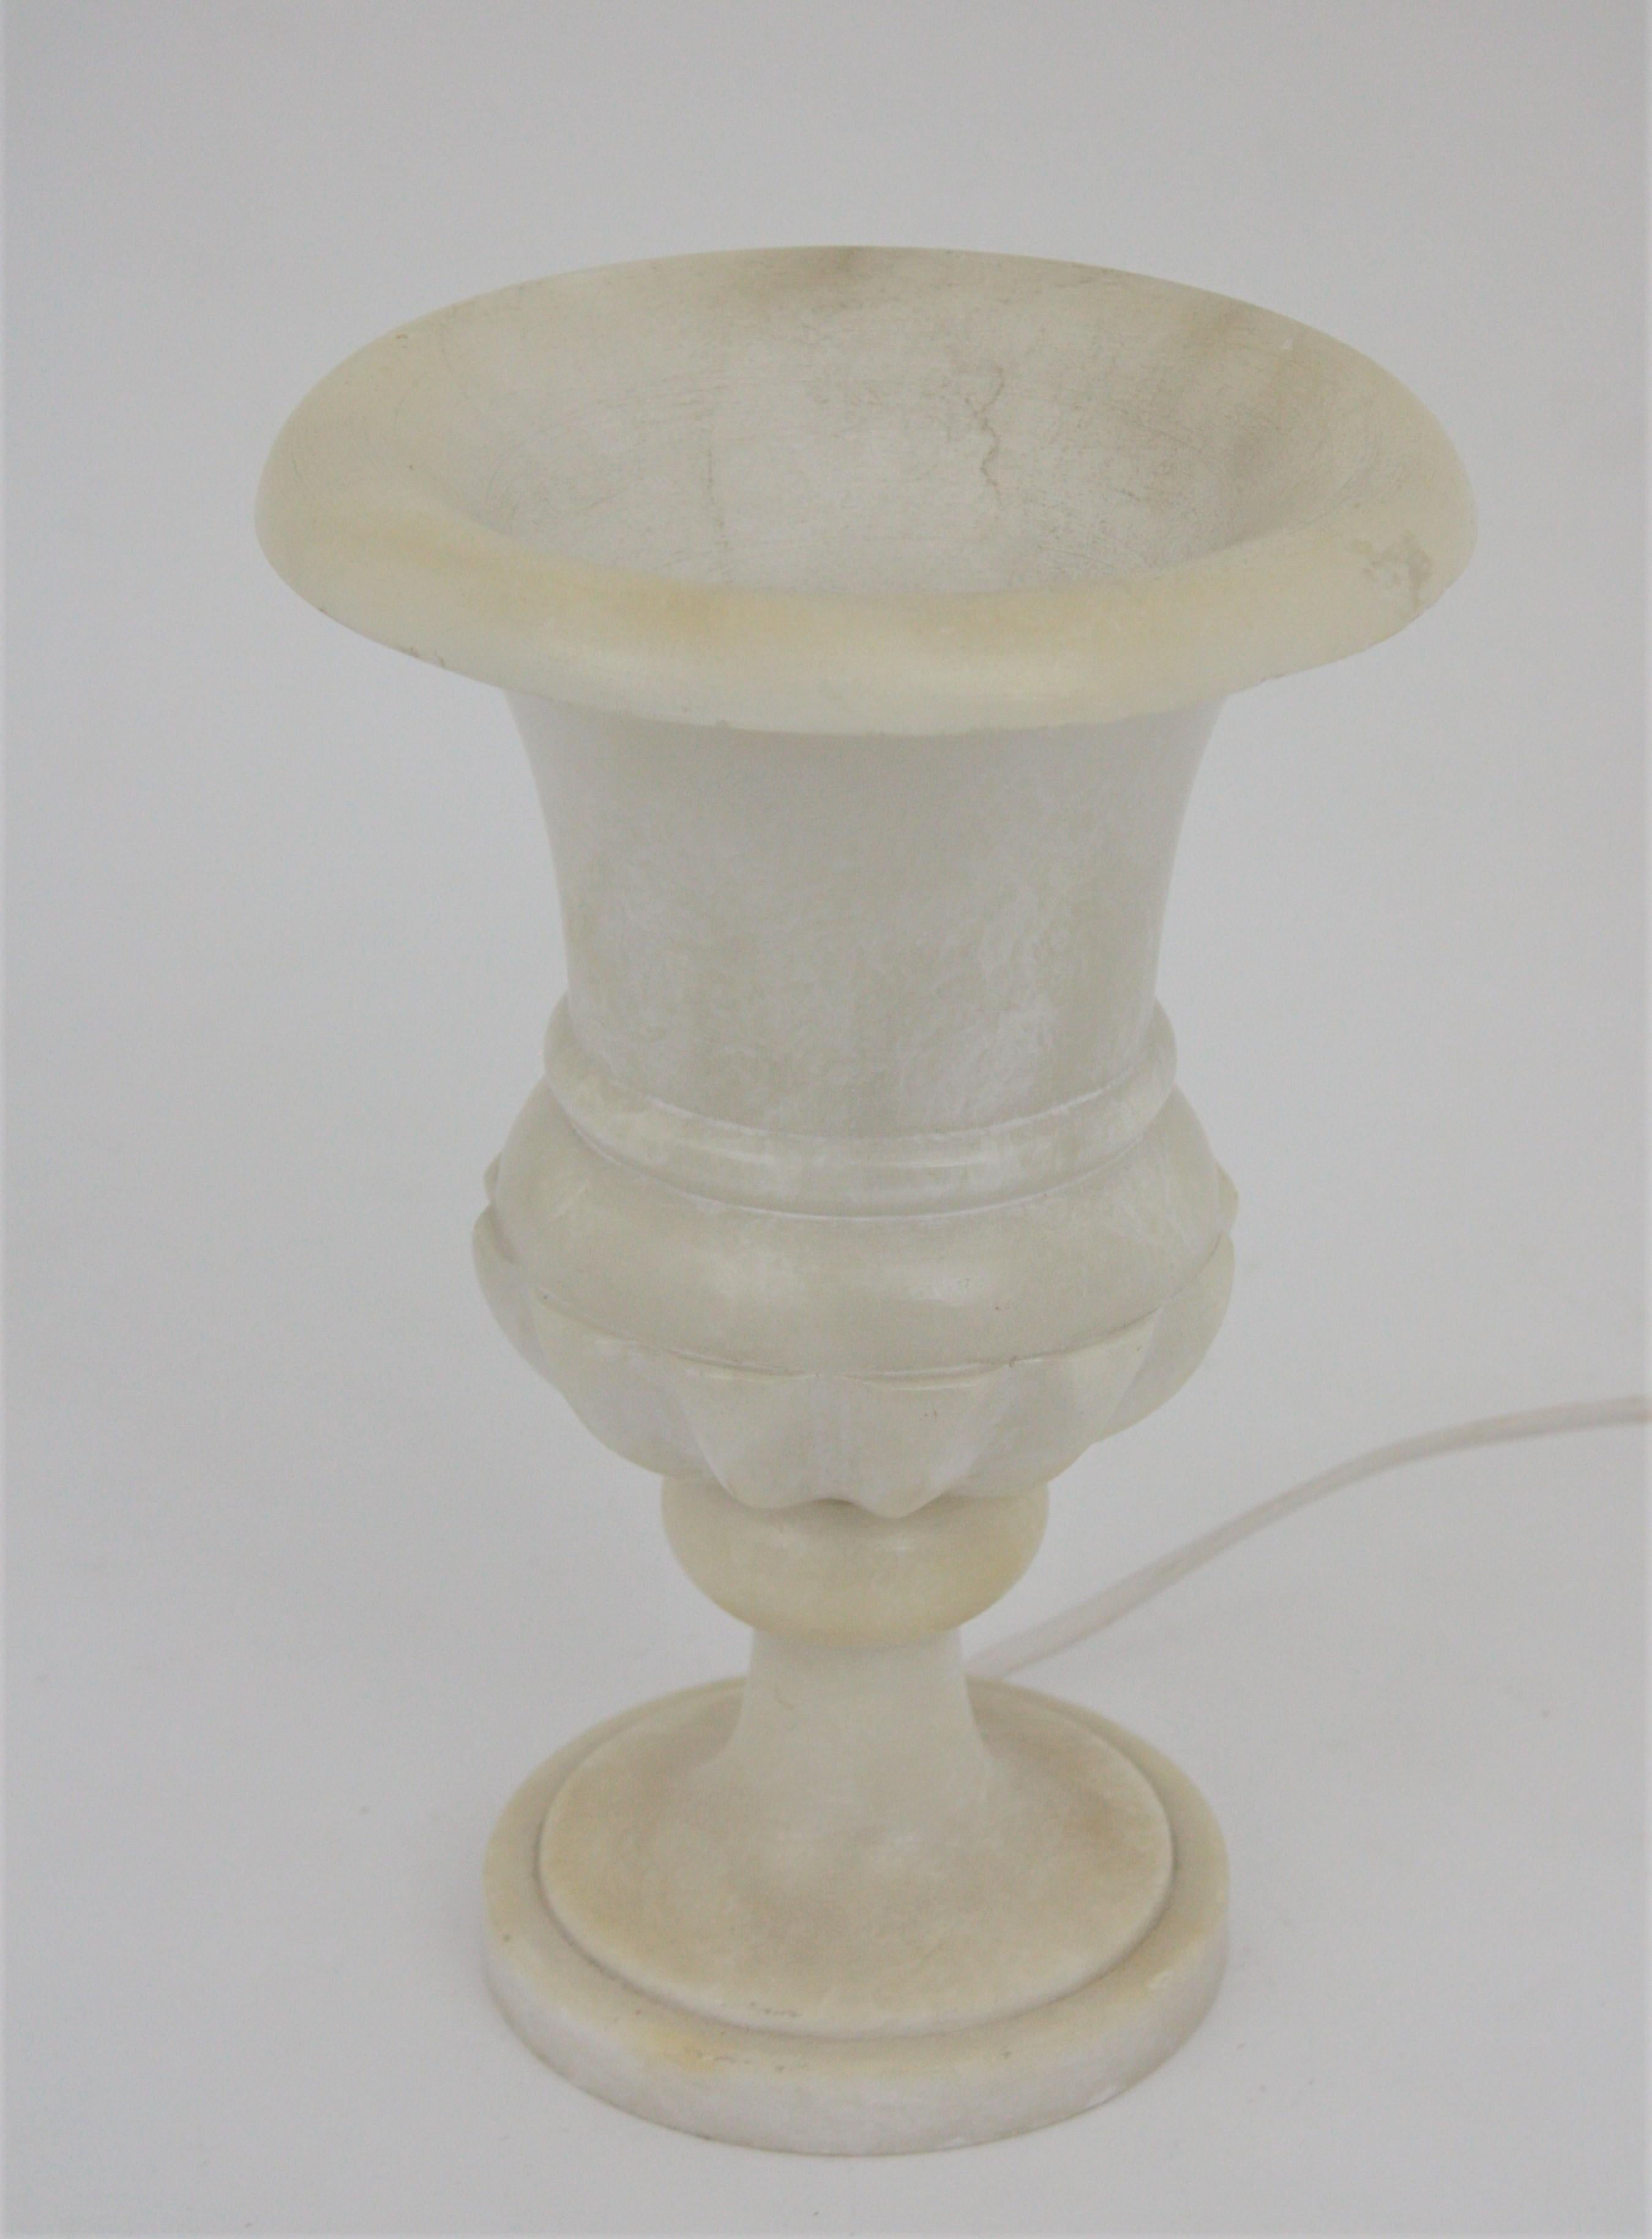 Art Deco Spanish Neoclassical Style Alabaster Urn Table Lamp, 1930s For Sale